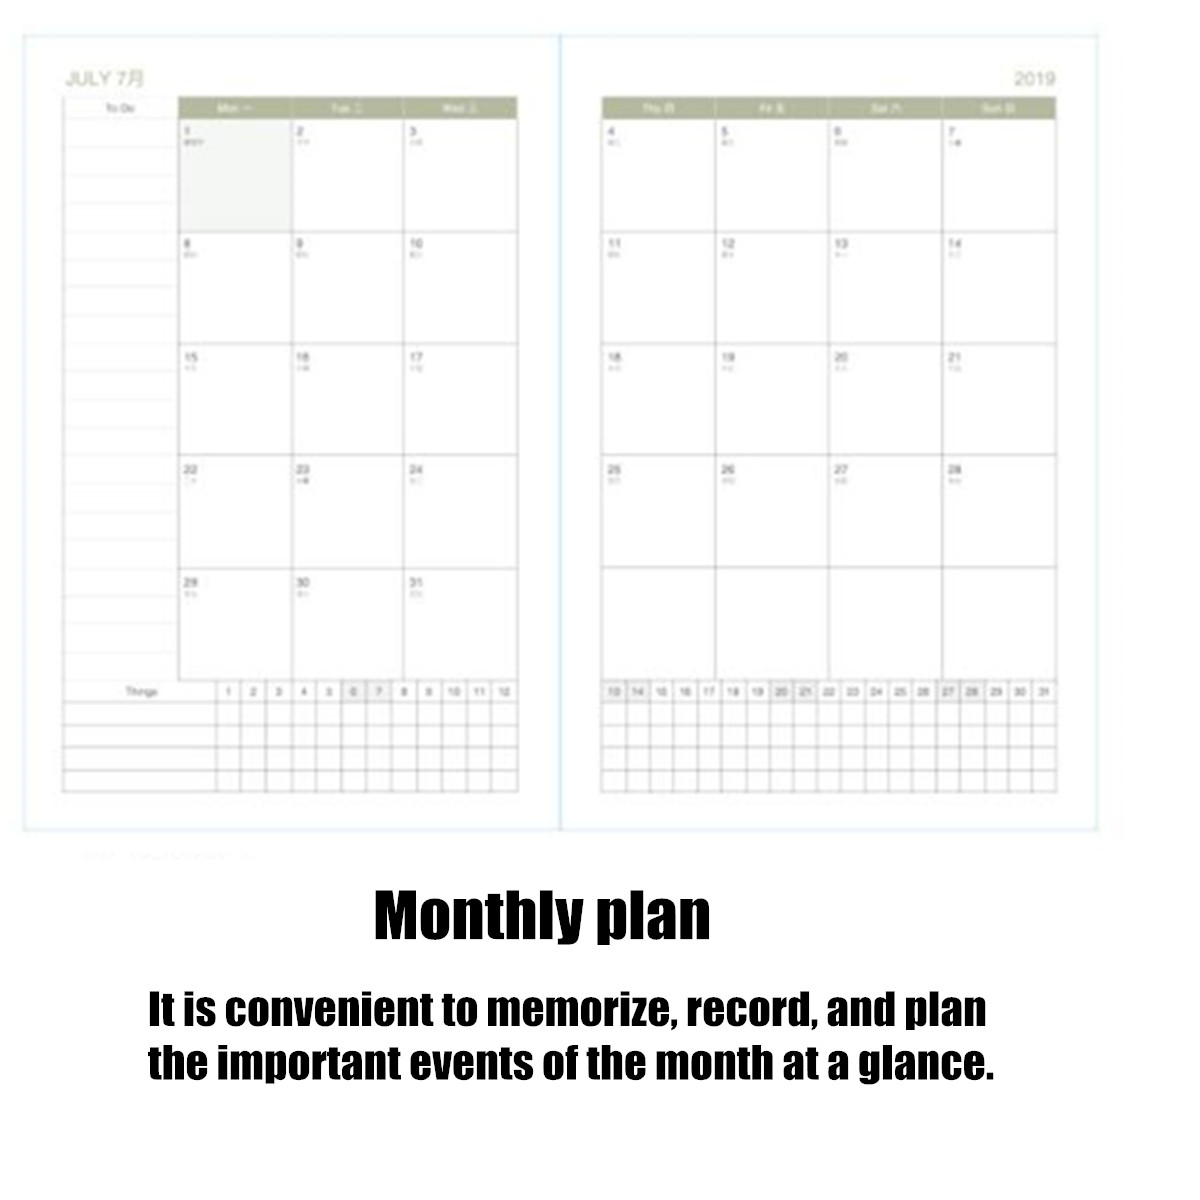 2019-2020-Weekly-Monthly-Agenda-Planner-Monthly-Weekly-Plan-Portable-Notebook-Cute-Diary-Flower-Sche-1530952-10